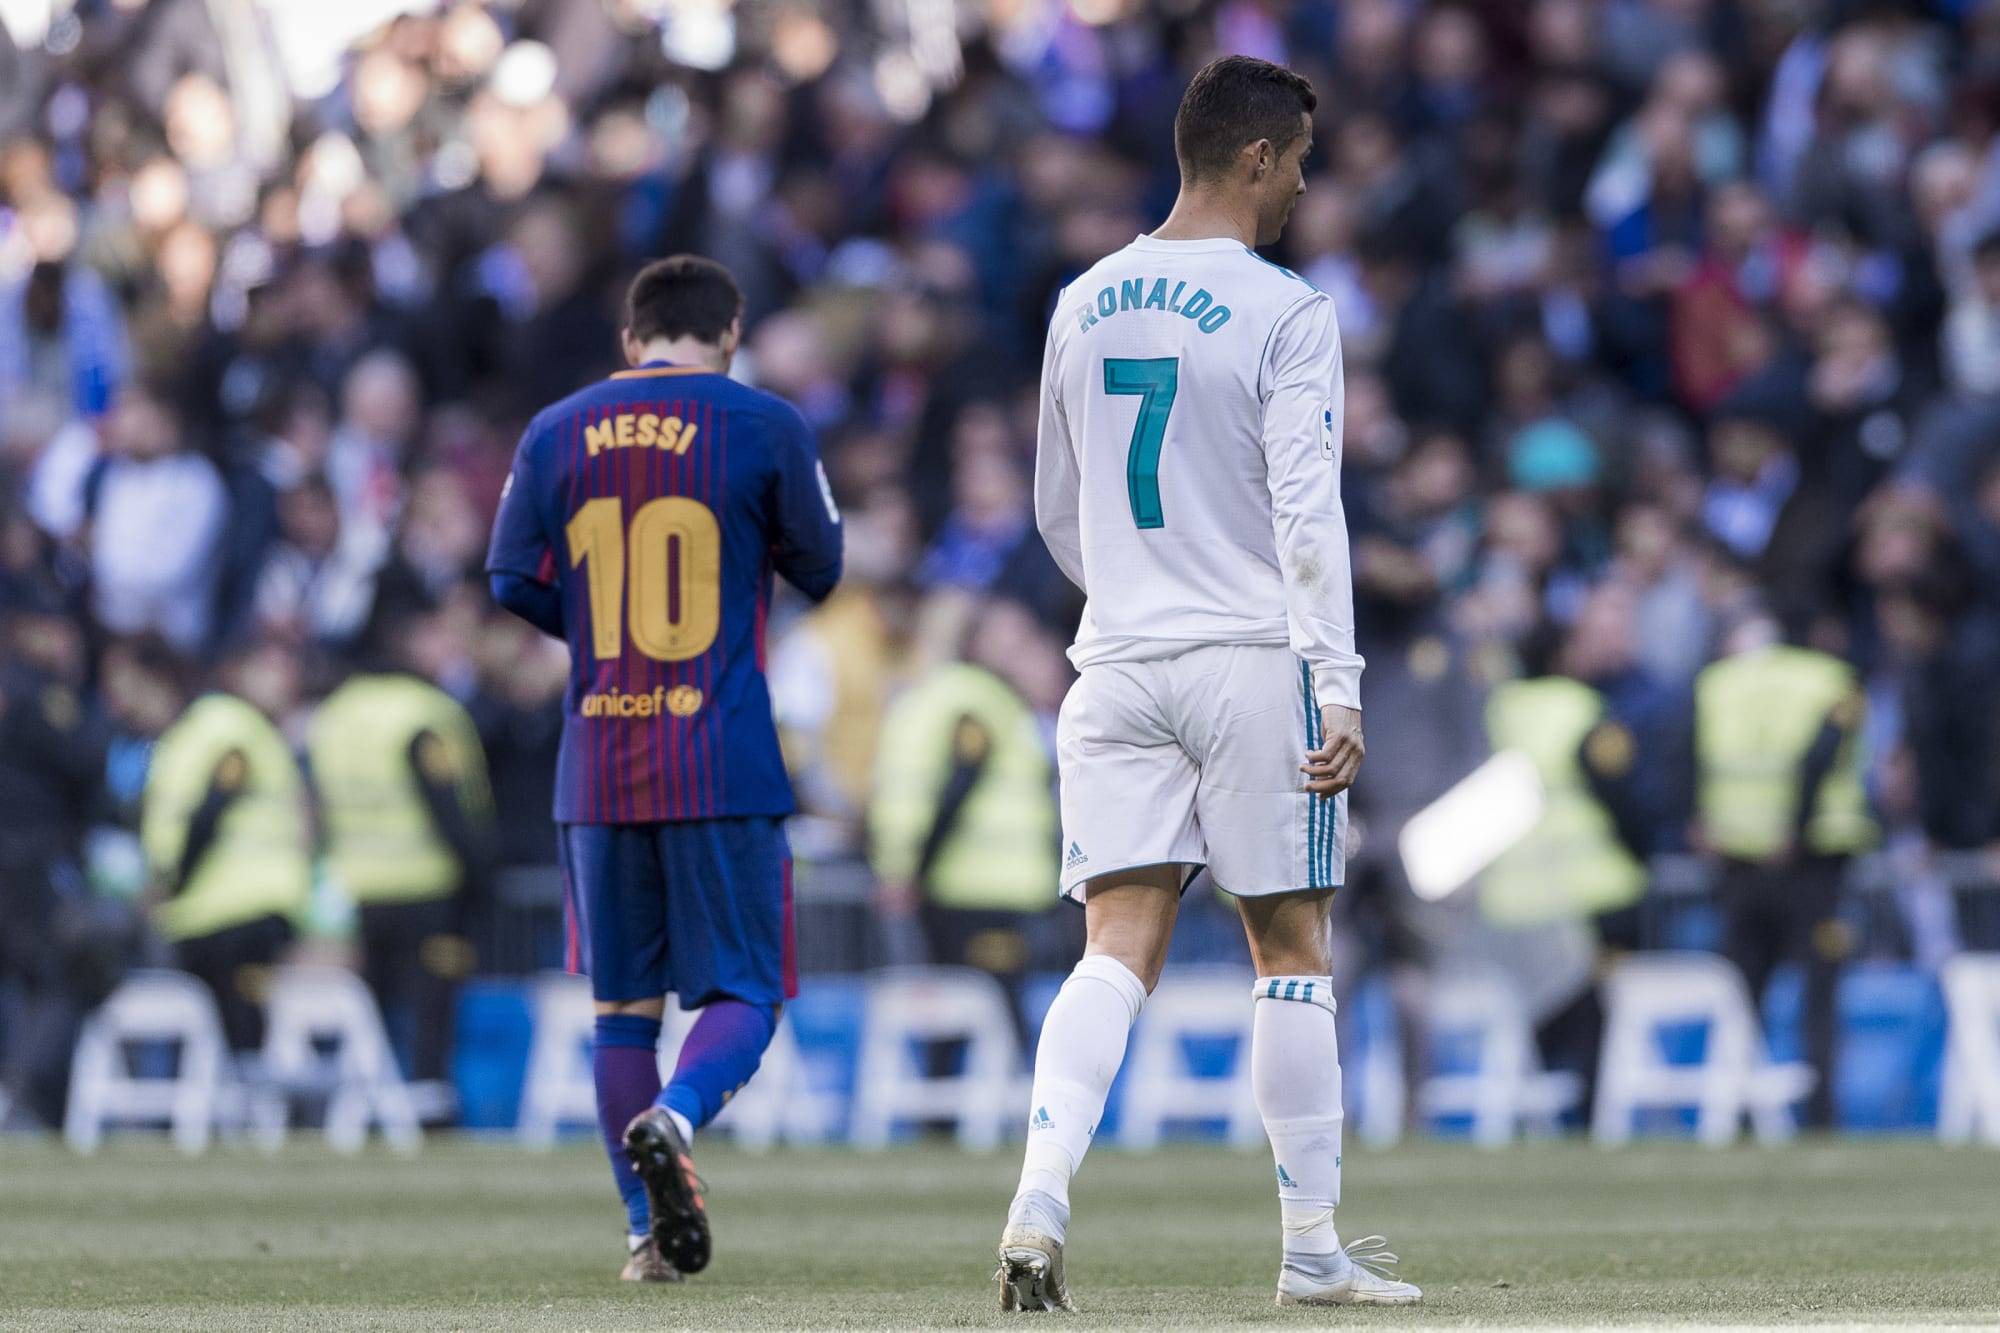 Messi vs Ronaldo: Are they friends off the pitch? Relationship